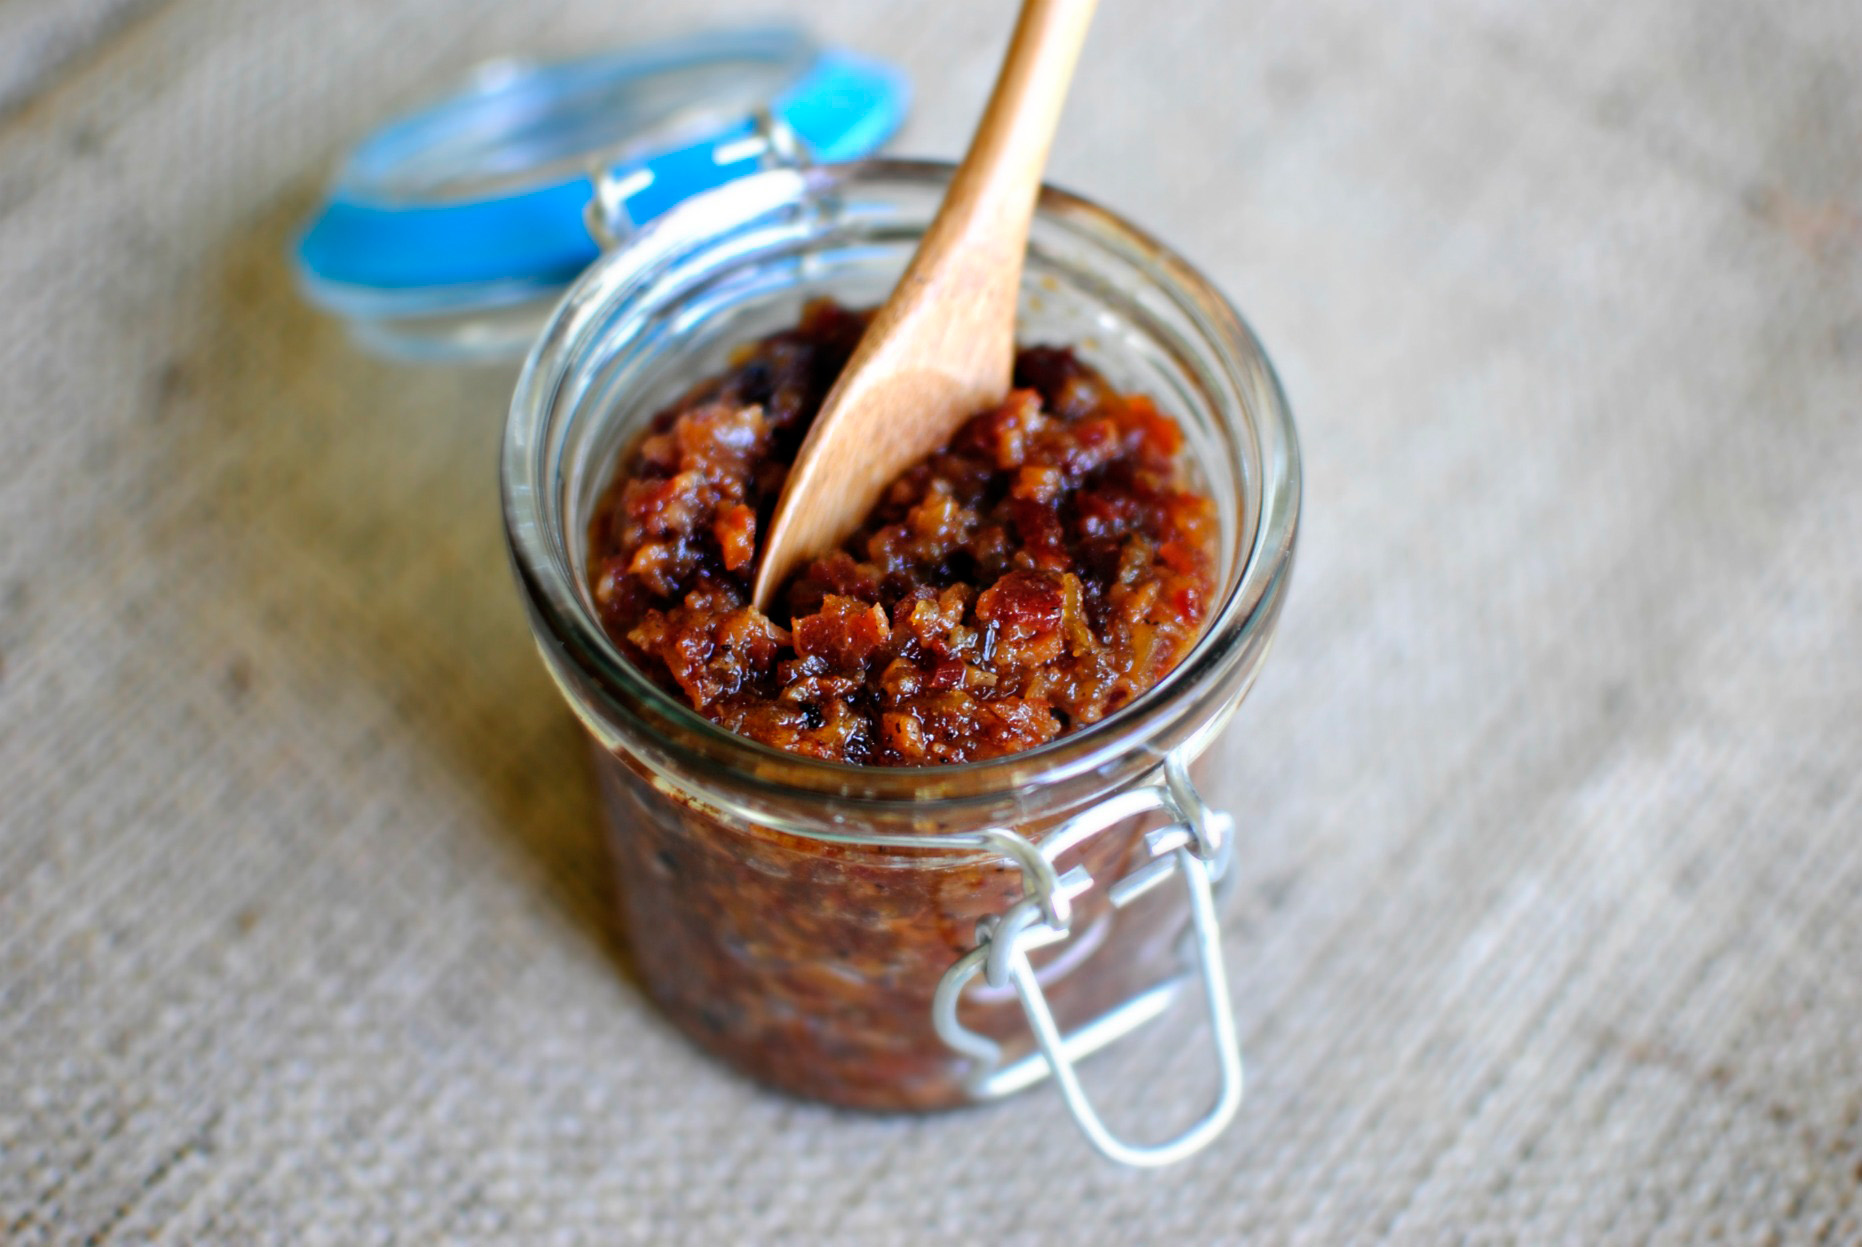 Tasty Kitchen Blog: Bacon Jam. Guest post by Laurie McNamara of Simply Scratch, recipe submitted by TK member Rebecca of Foodie with Family.